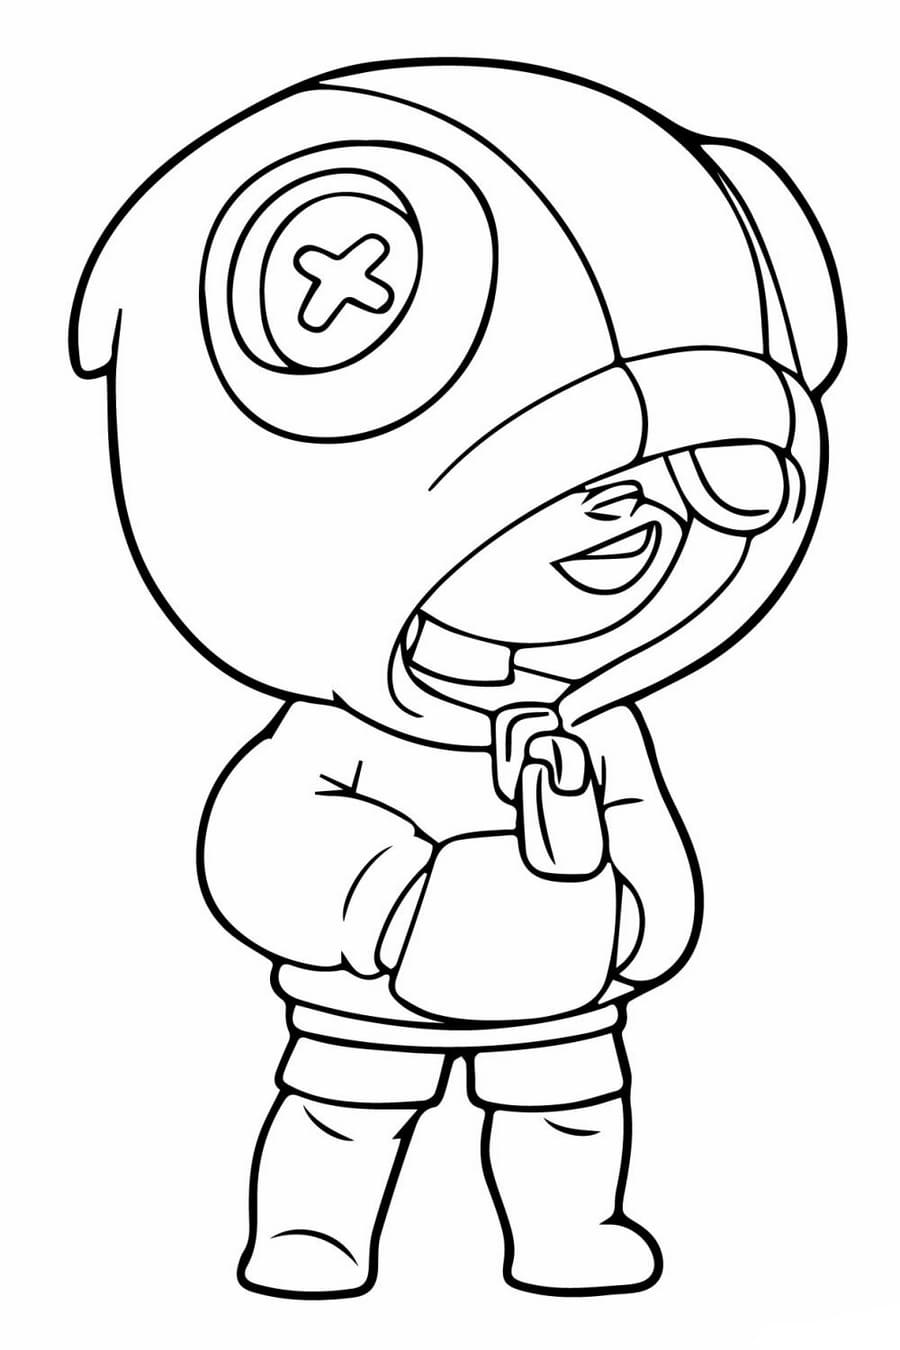 Leon Brawl Stars Coloring Pages Print For Free Wonder Day Coloring Pages For Children And Adults - brawlers brawl stars para colorir